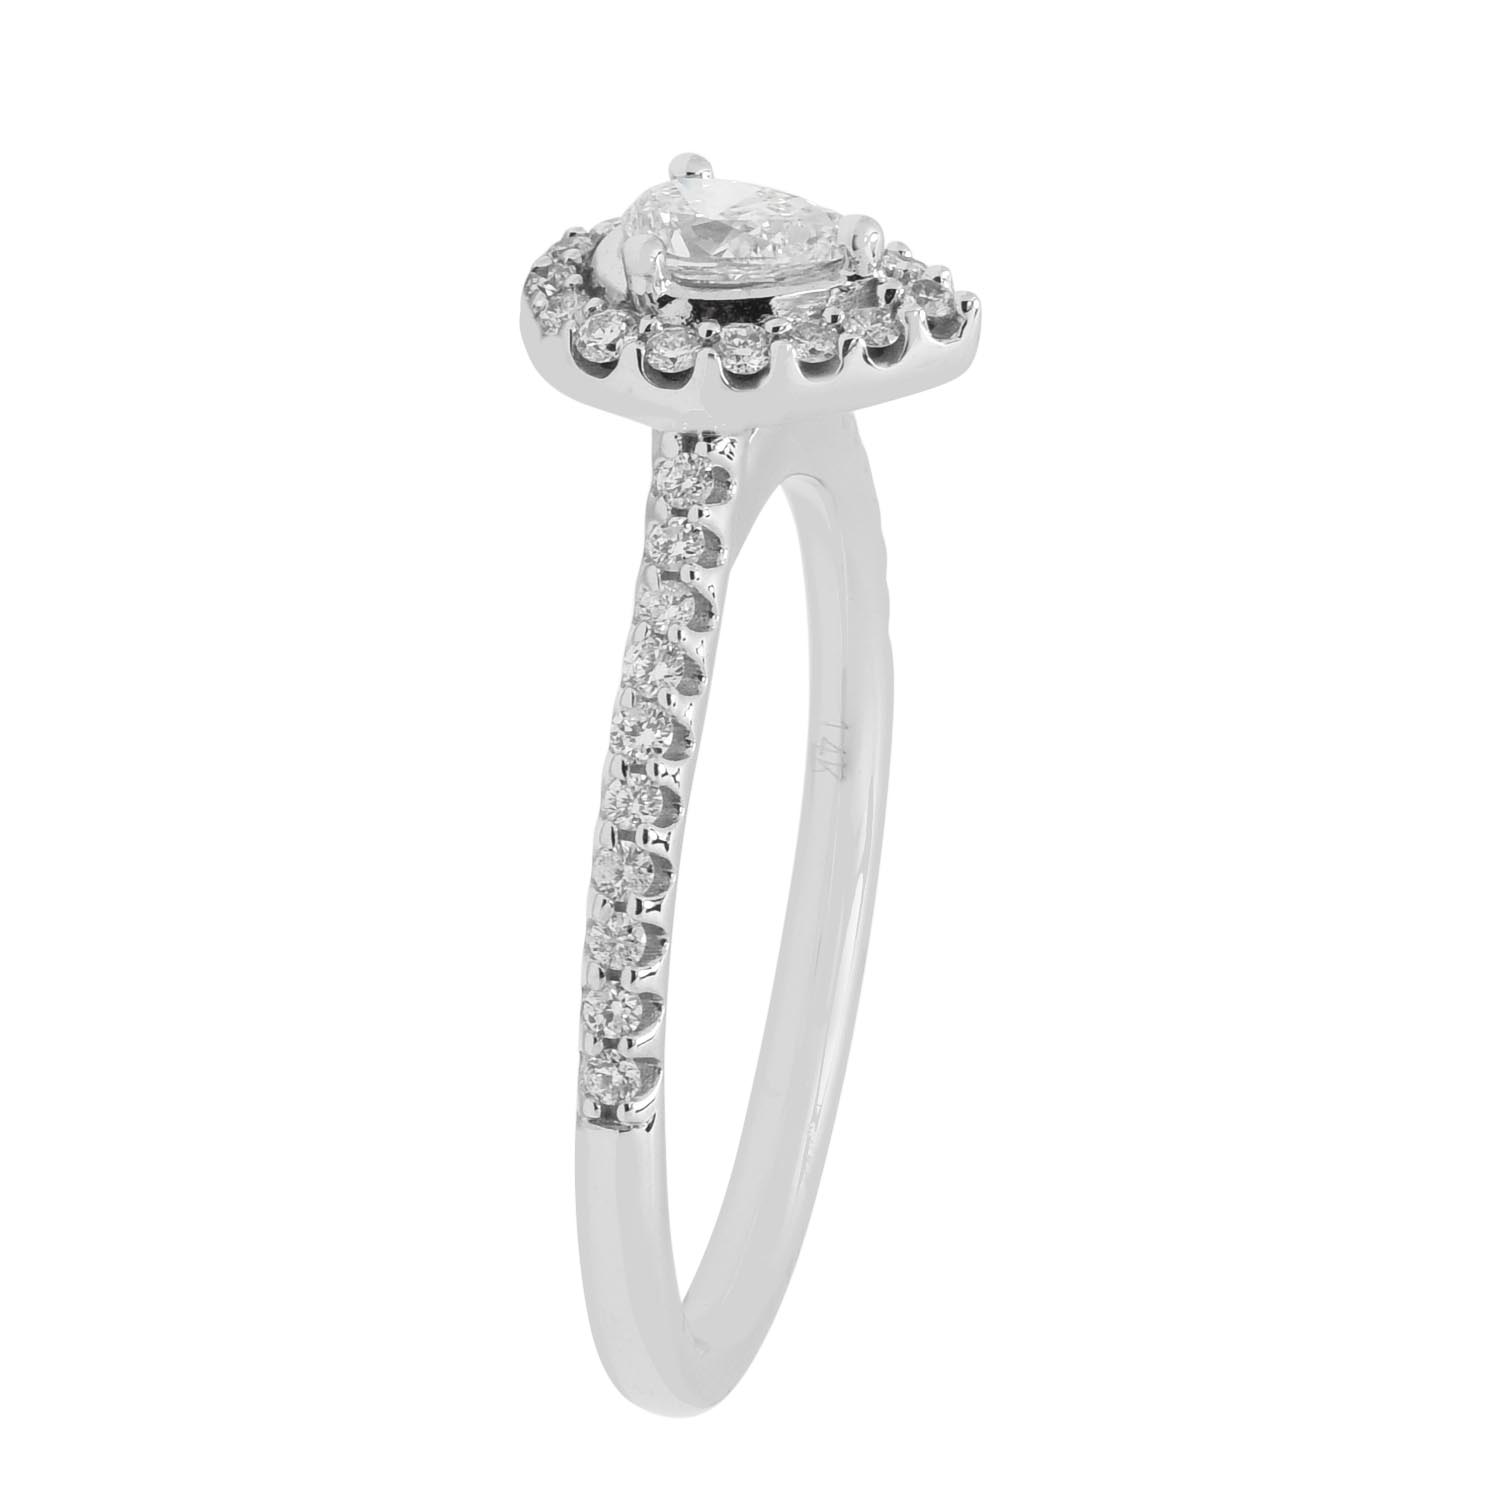 Pear Diamond Halo Engagement Ring in 14kt White Gold (1/2ct tw)